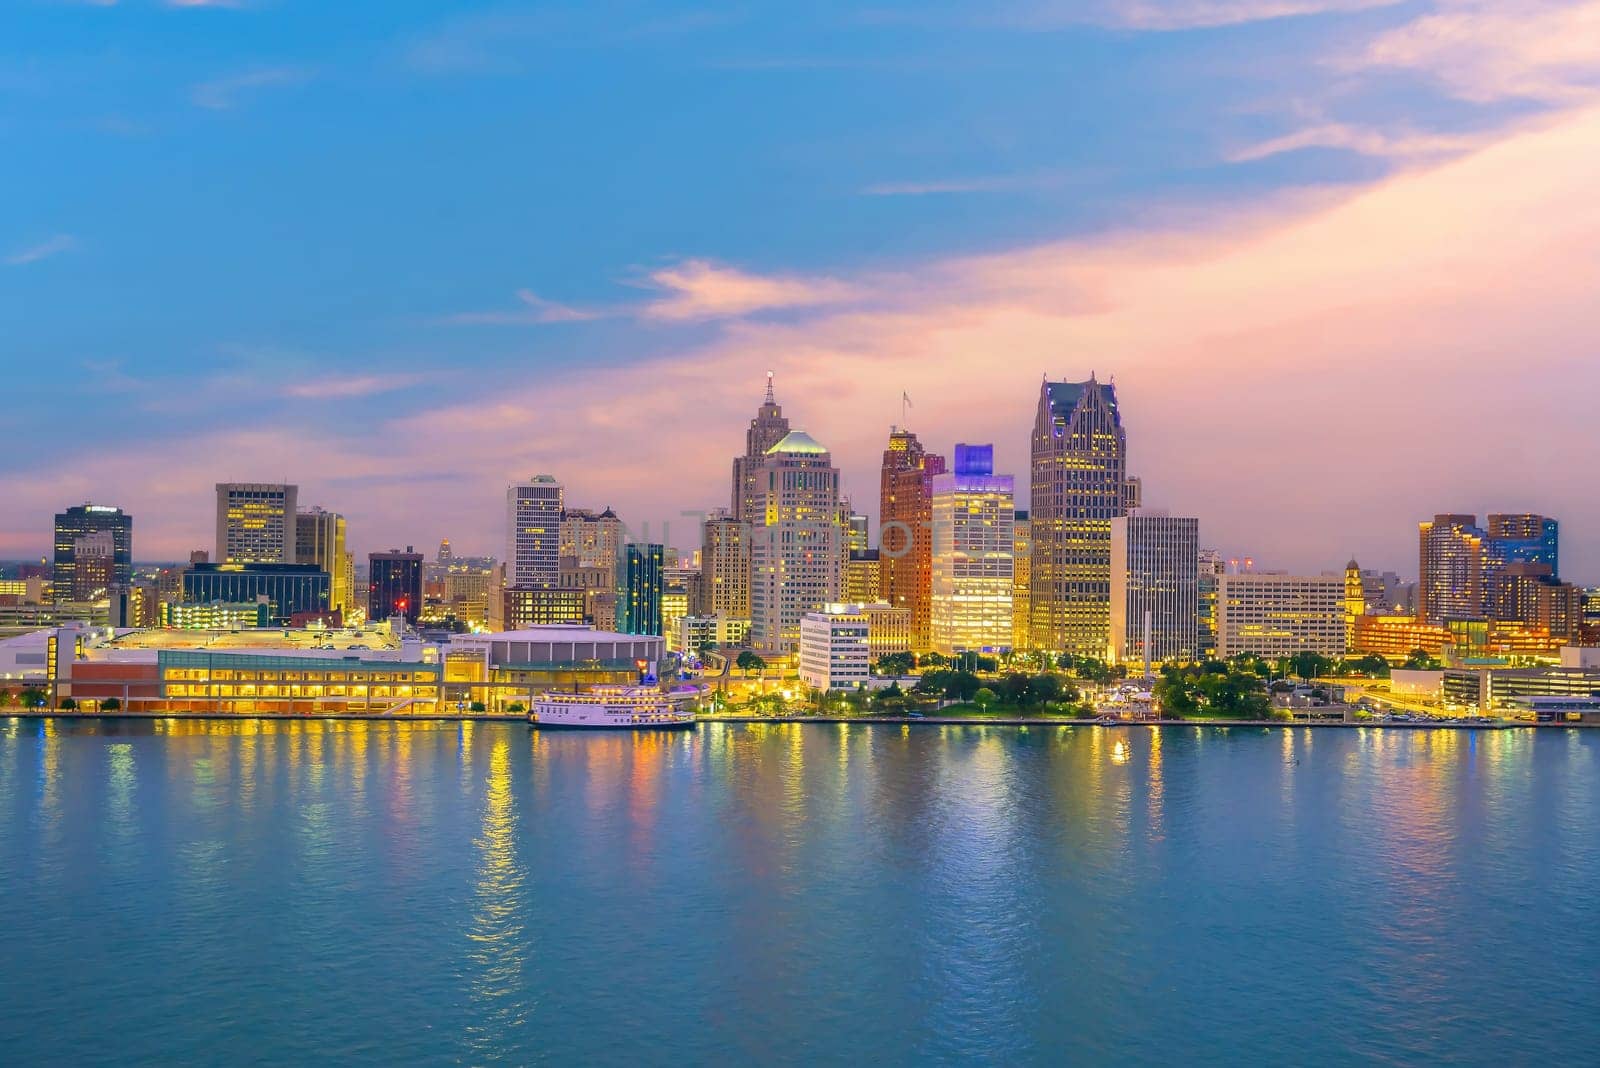 Detroit skyline in Michigan, cityscape of USA at sunset shot from Windsor, Ontario  by f11photo